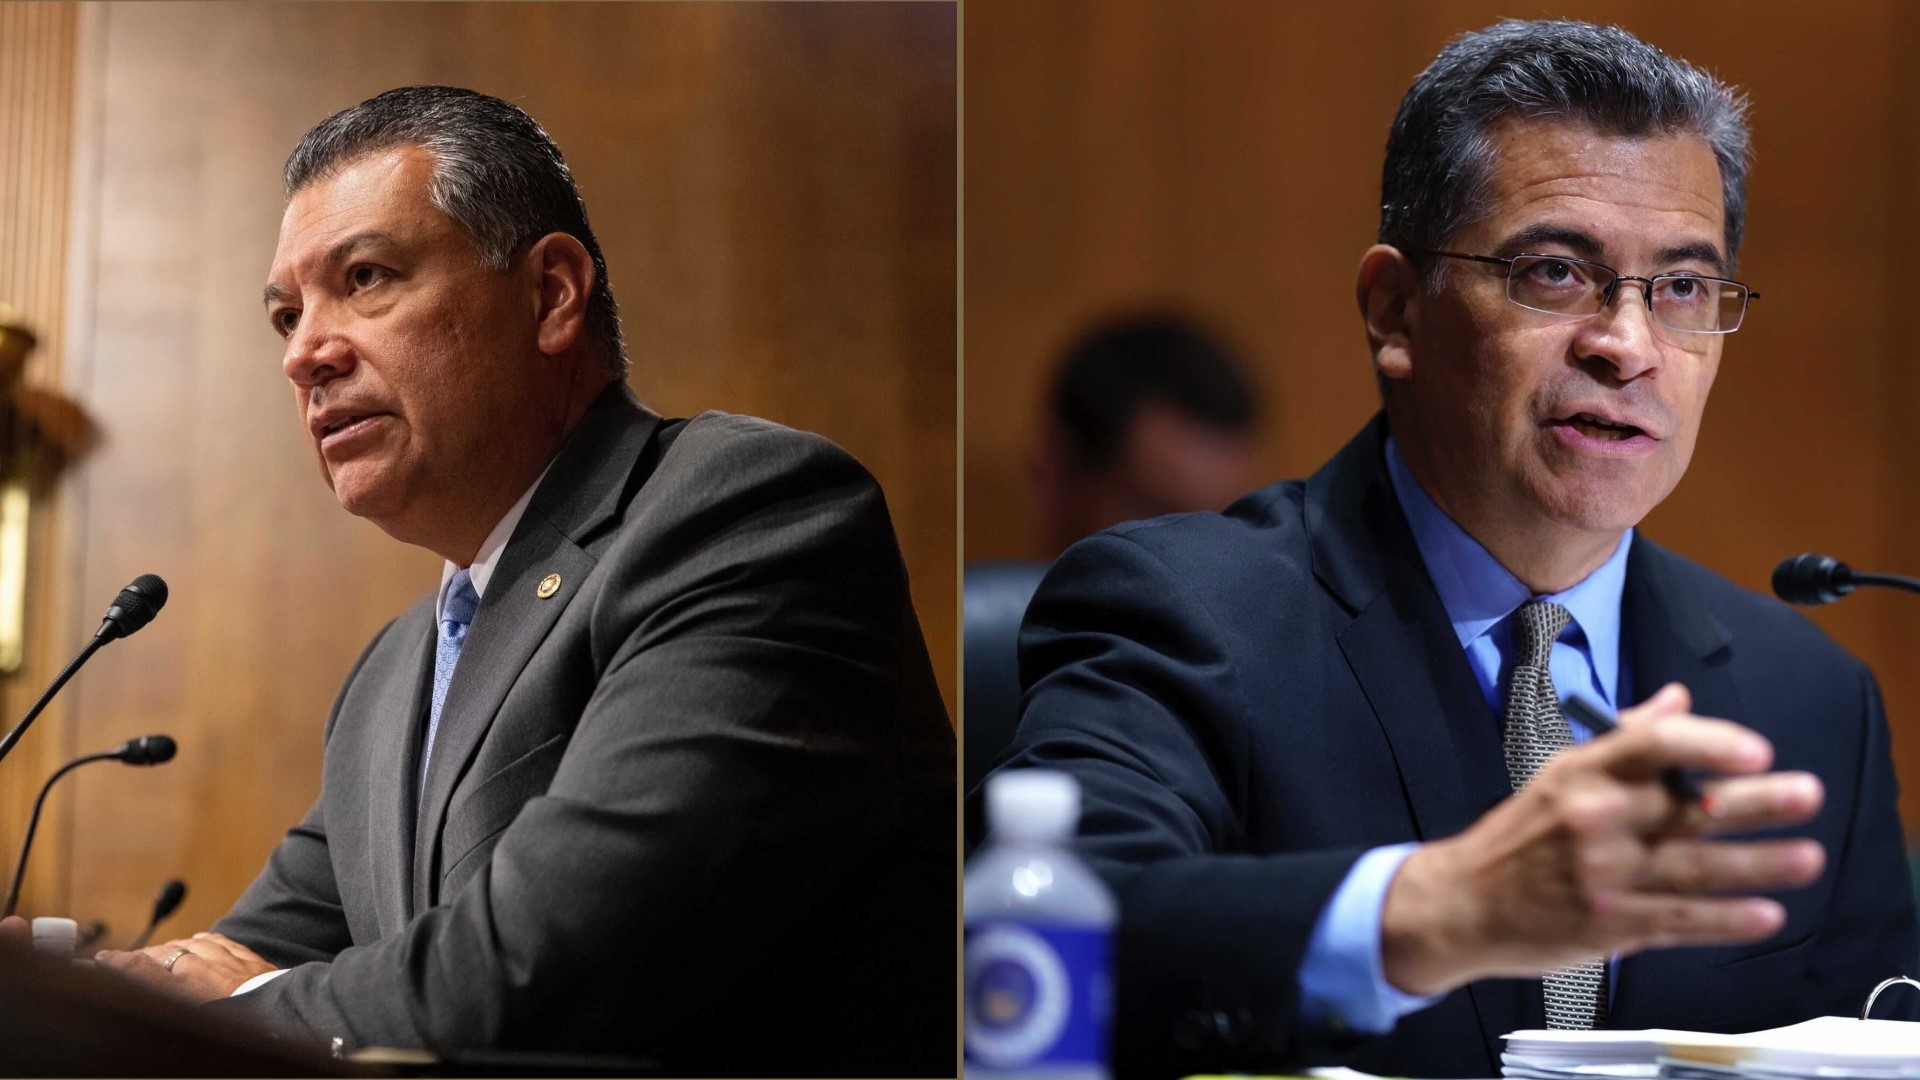 Xavier Becerra is the first Latino to hold the office of Health and Human Services Secretary. Alex Padilla is the first Latino to be a Senator from California.